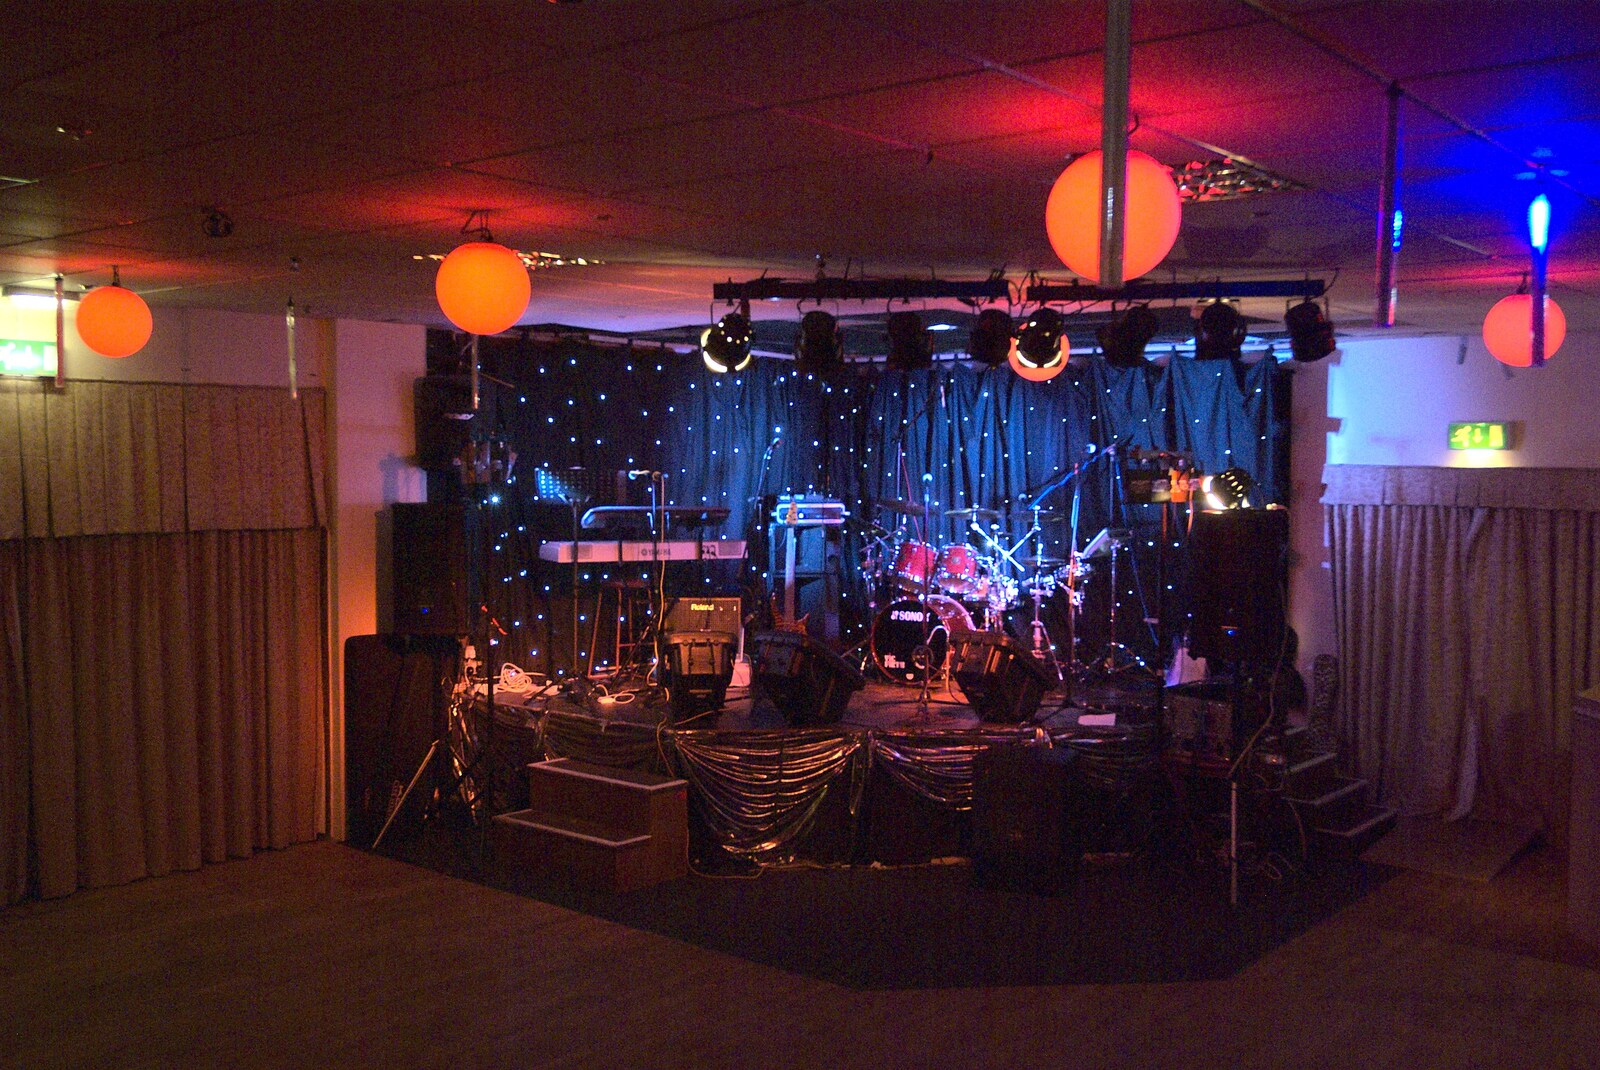 The stage is set up and ready from New Year's Eve With The BBs, Park Hotel, Diss, Norfolk - 31st December 2010